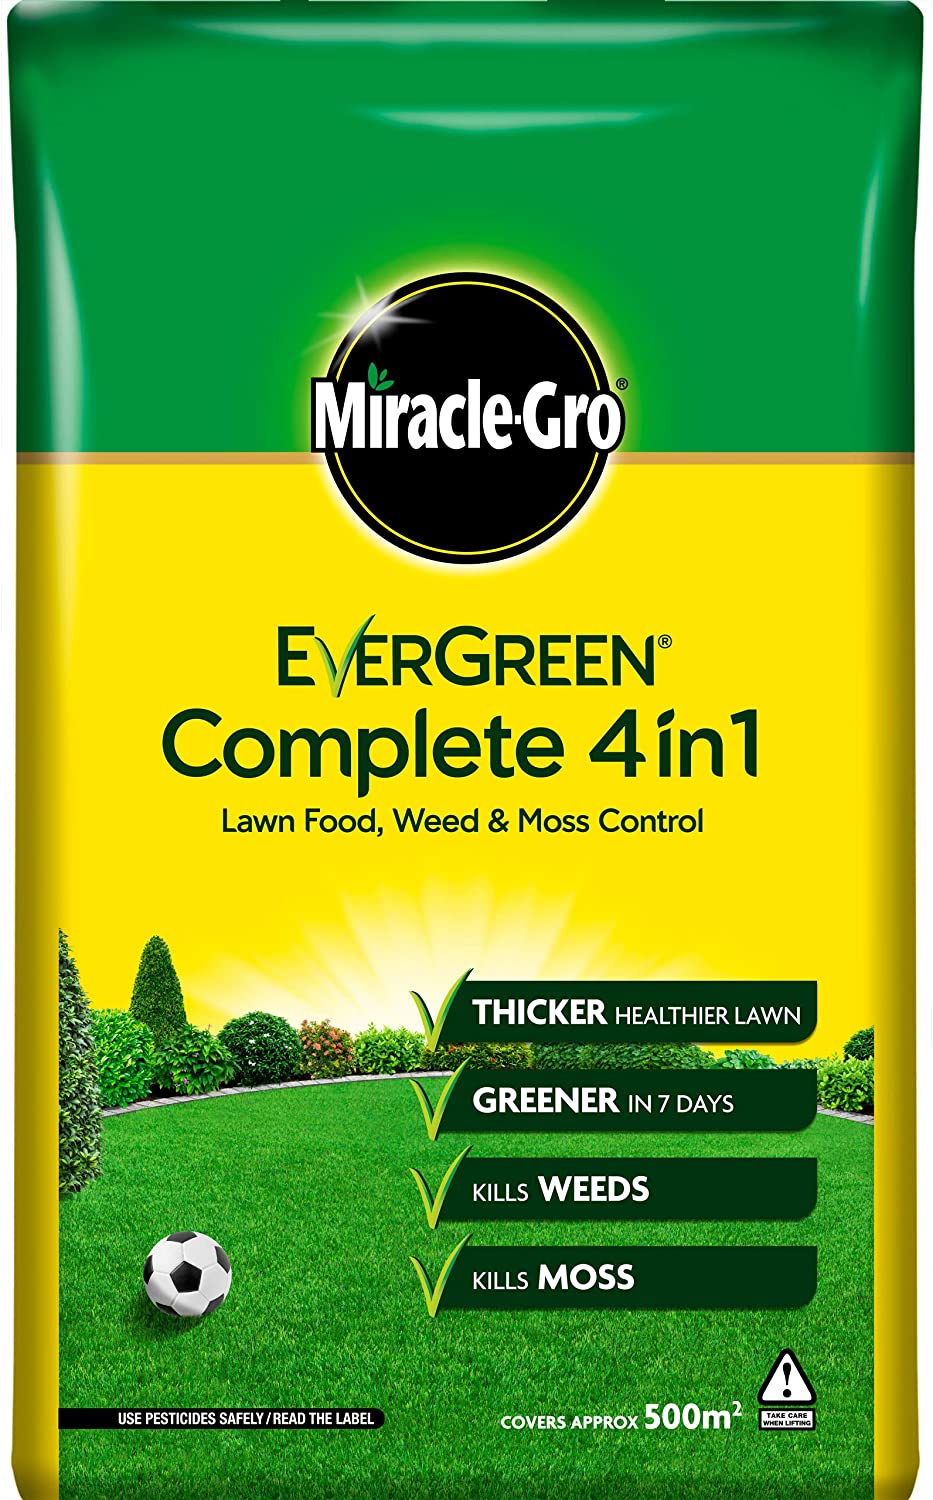 Miracle-Gro Complete 4 in 1 Lawn Food 500 m2 17.5 kg Lawn Food Weed & Moss Control